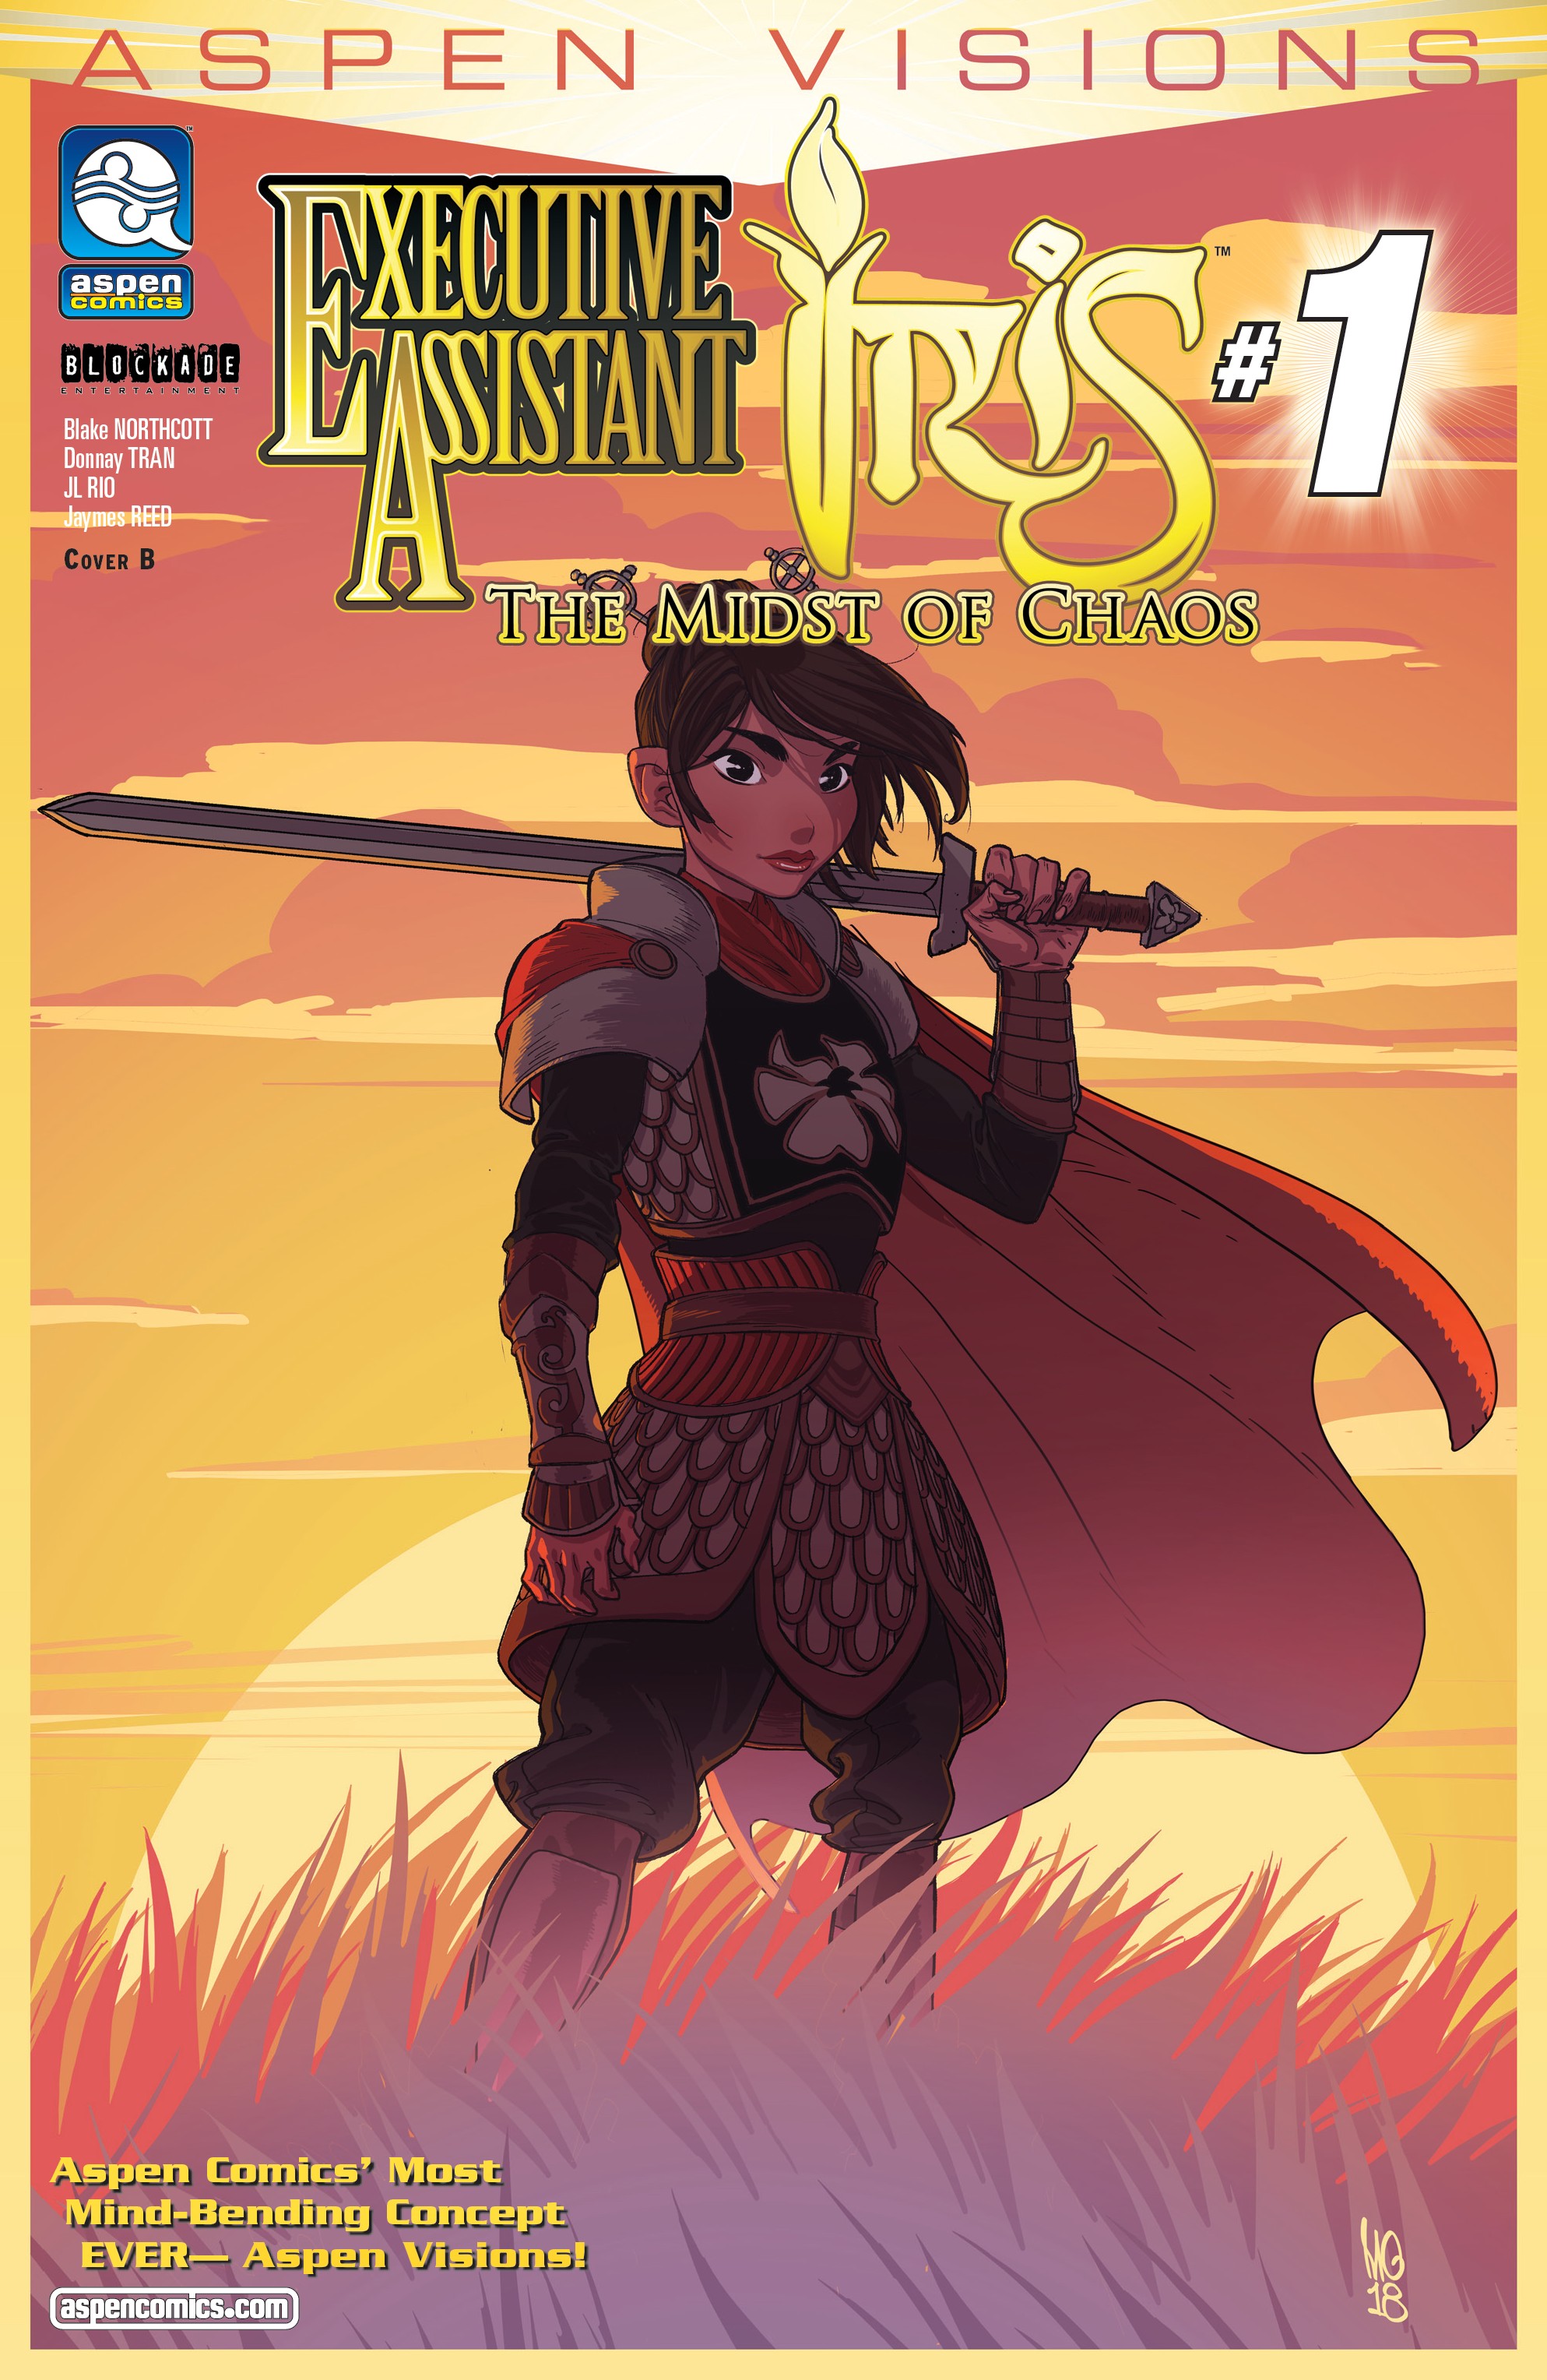 ASPEN VISIONS: Executive Assistant: Iris Vol. 1 (2019-): Chapter 1 - Page 2